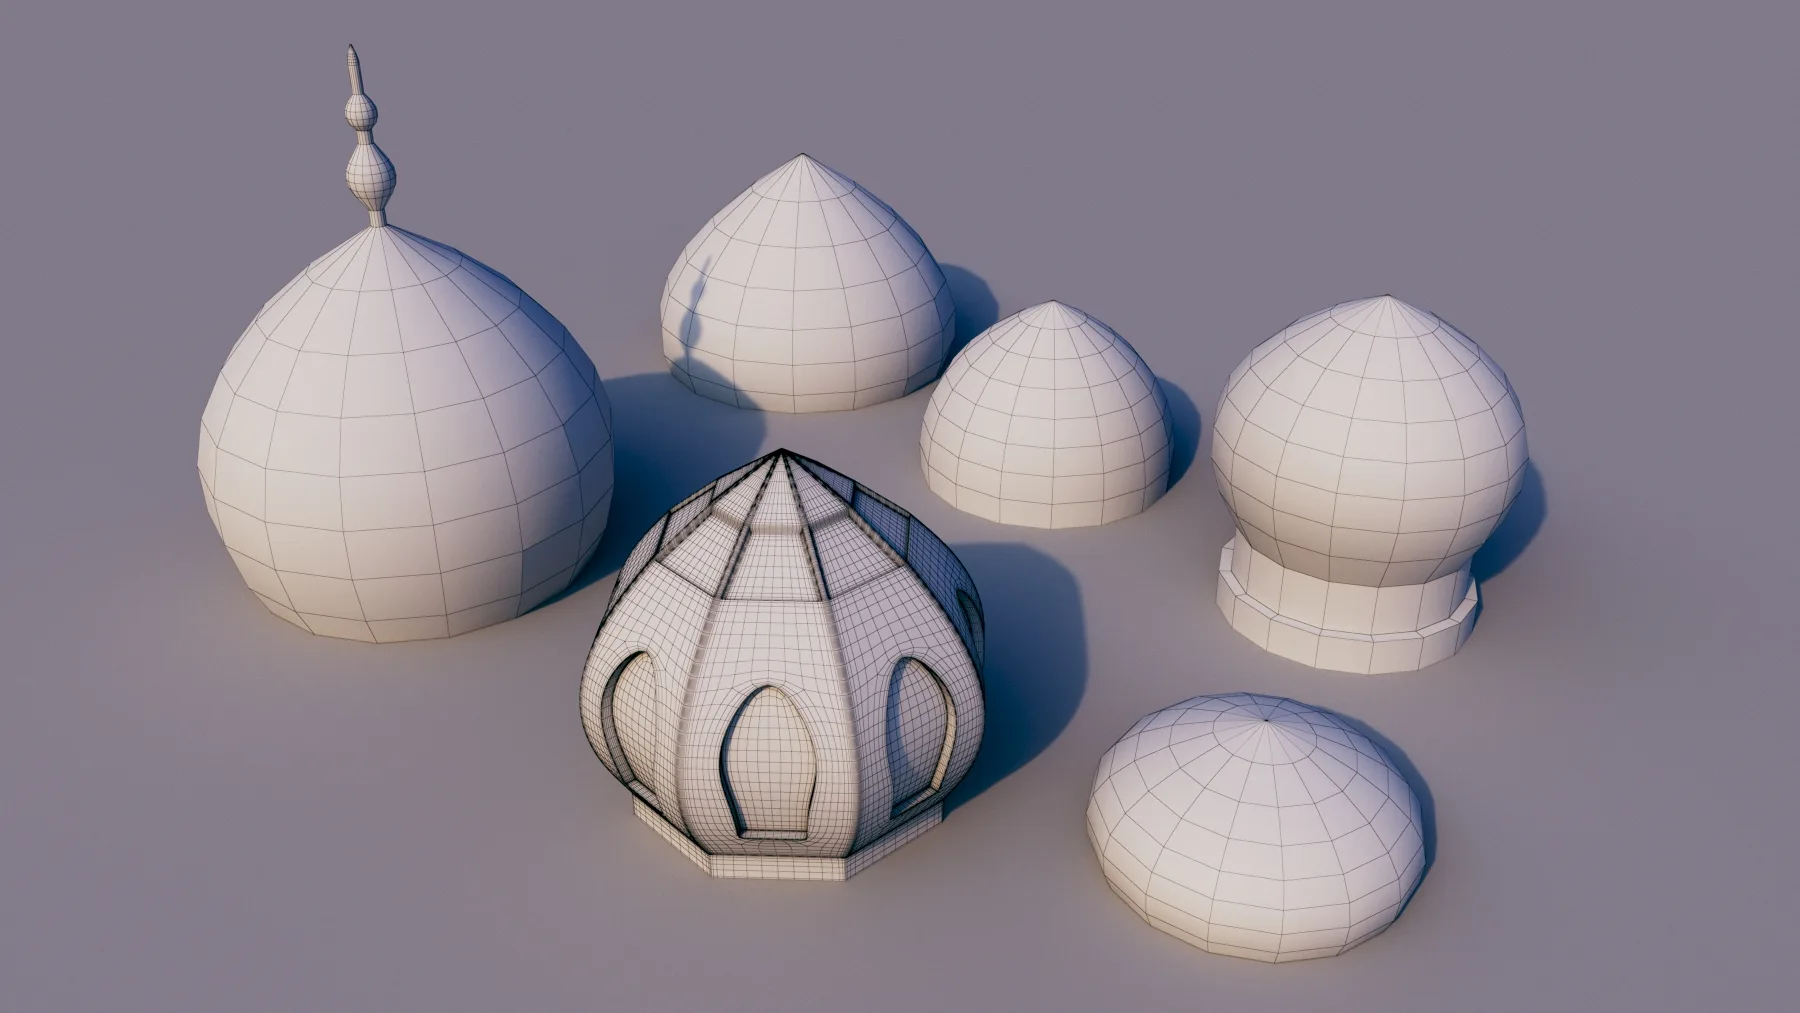 10 Models of Arabic houses and36 models of middle Eastern object Low-poly 3D model